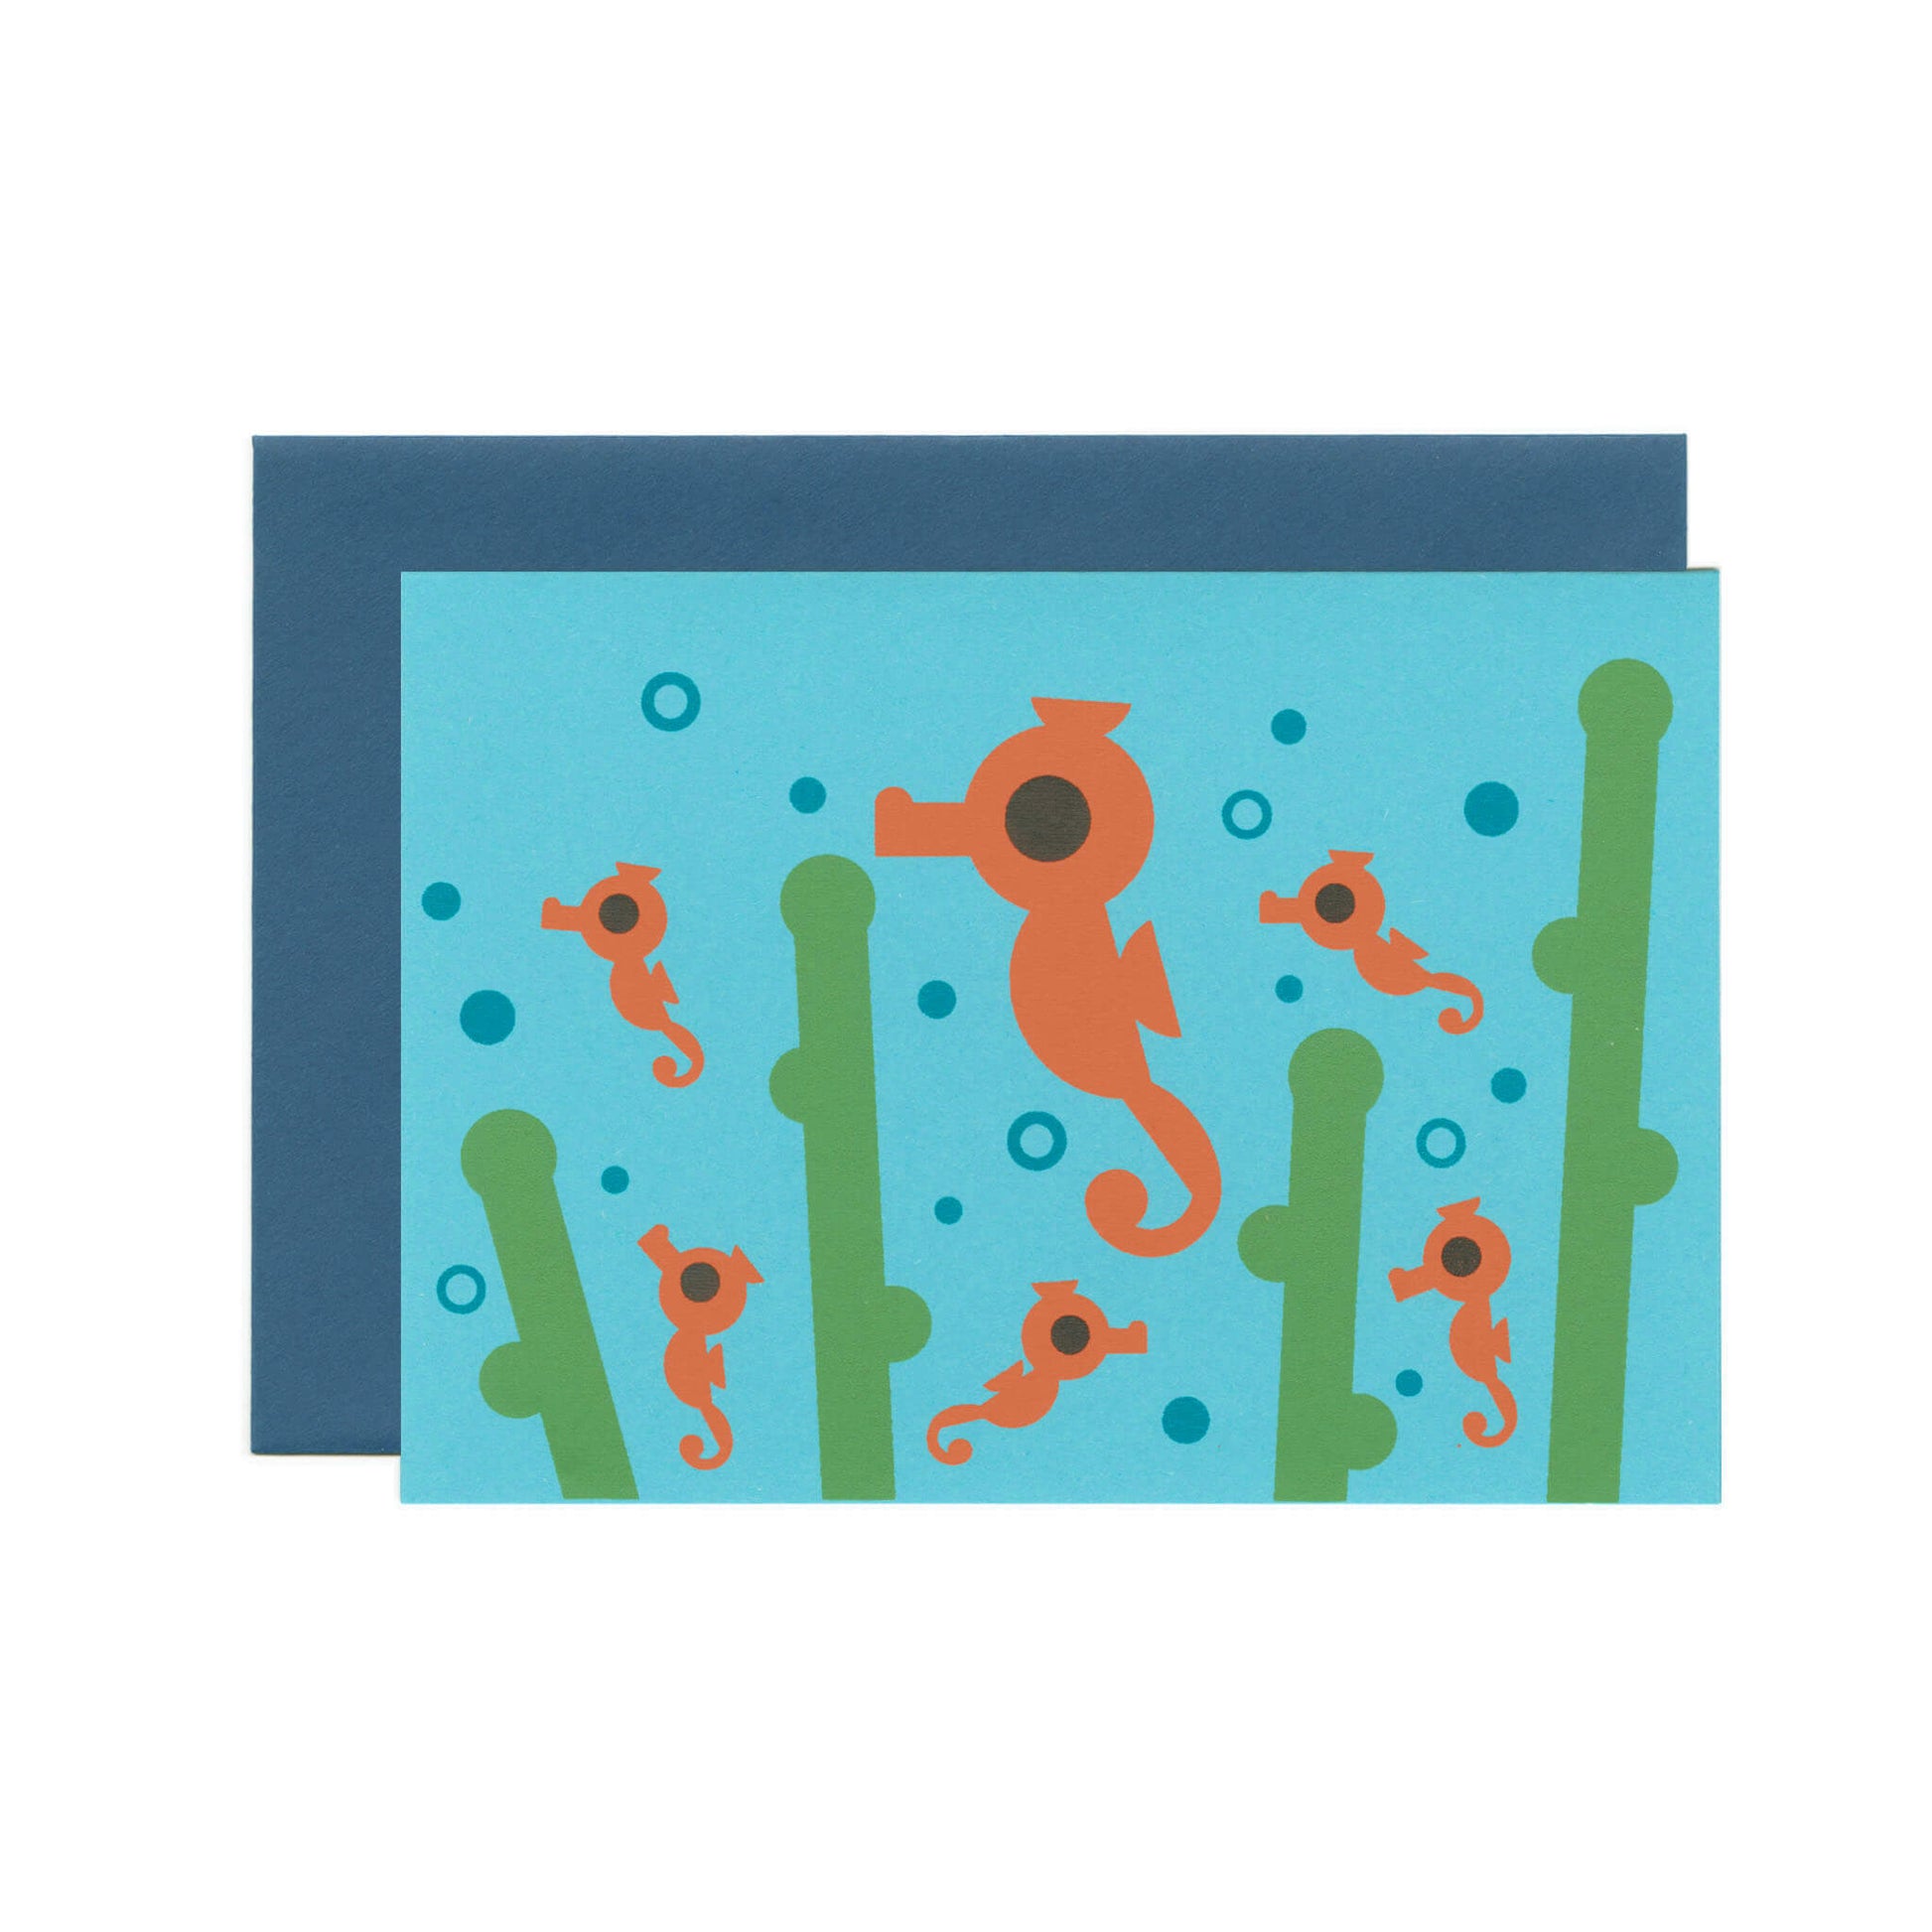 A blue greeting card with an illustration of seahorses, sea weed and bubbles. There's a dark-blue envelope behind the card.